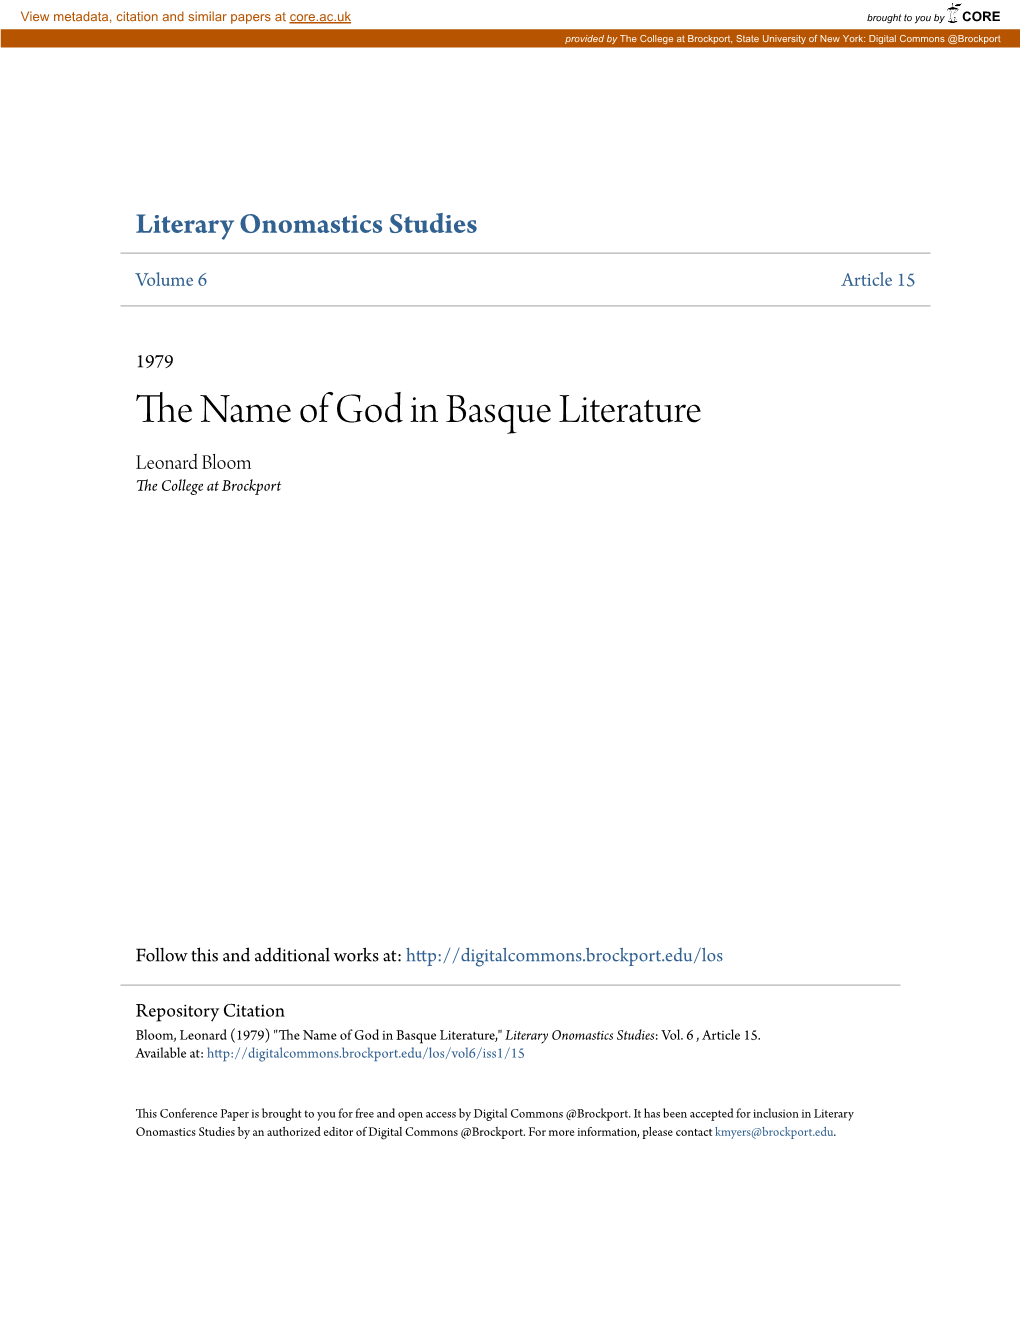 The Name of God in Basque Literature